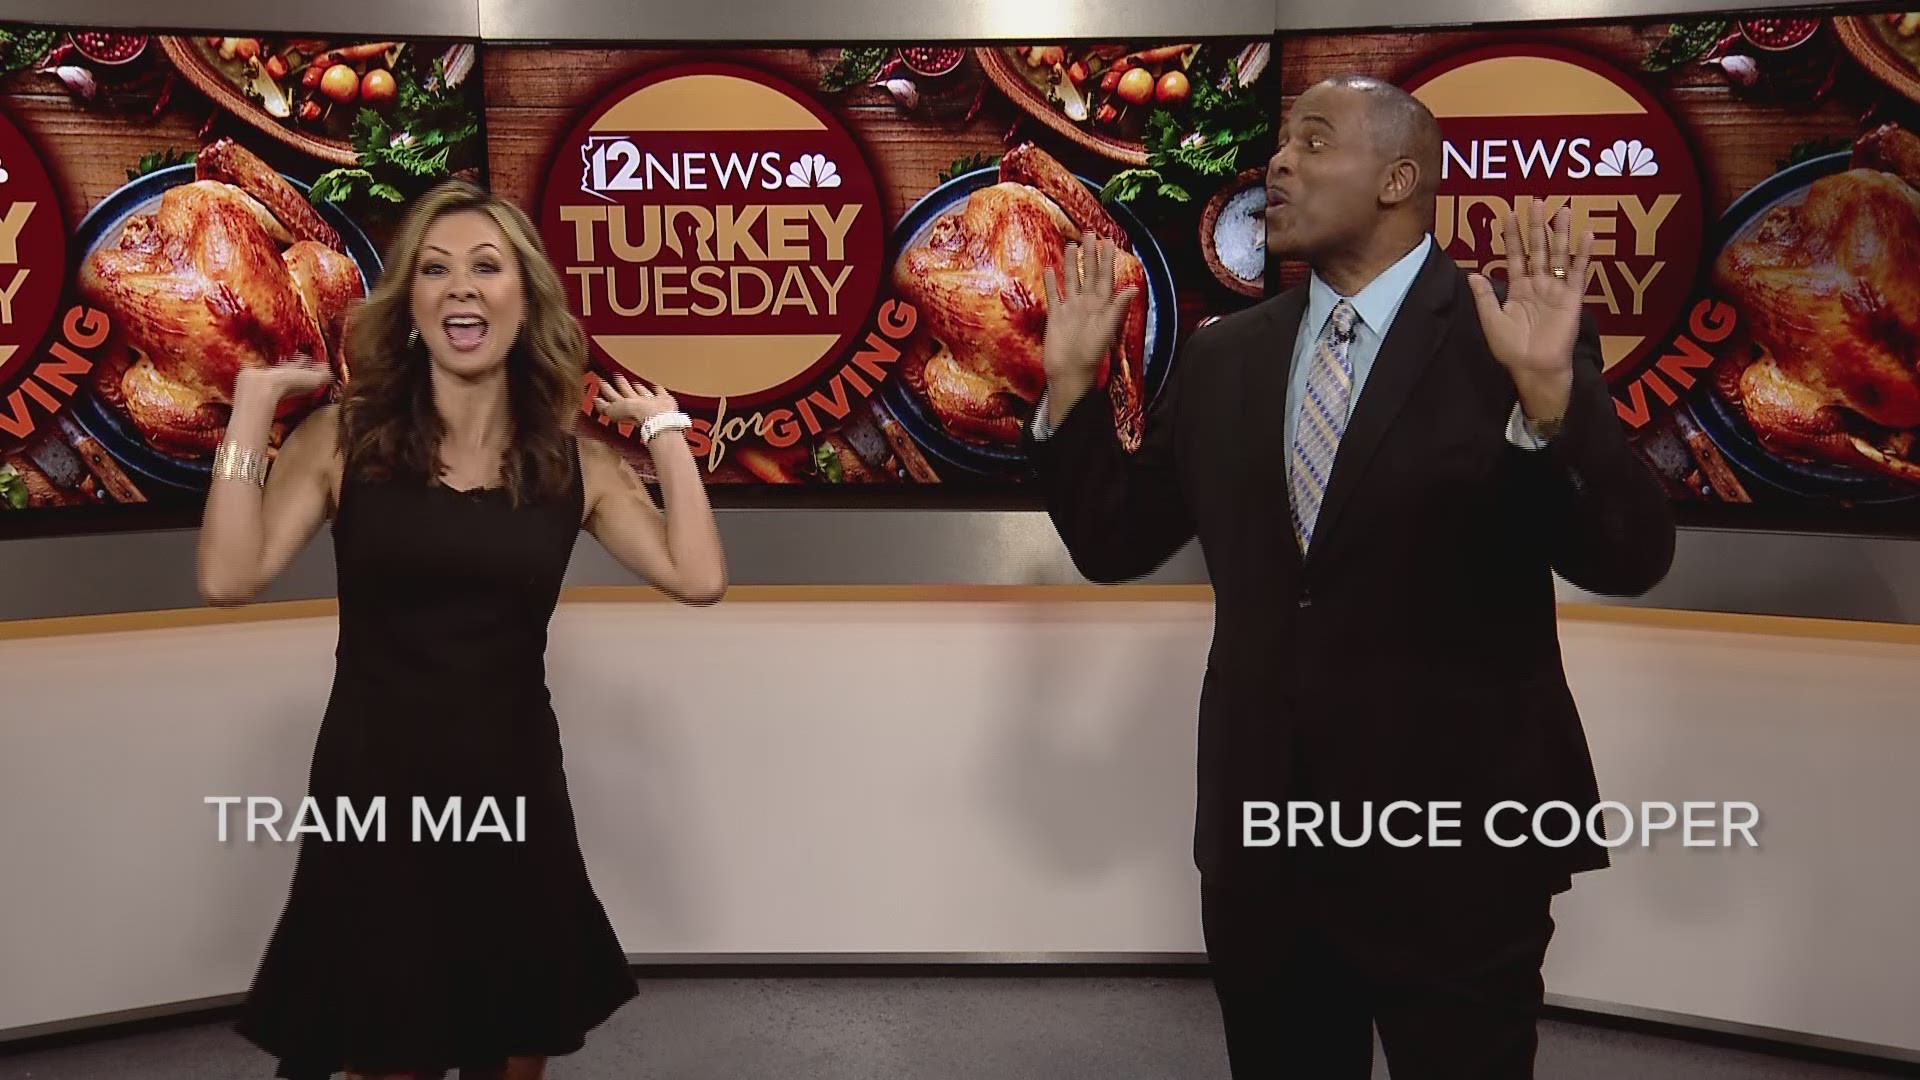 You can text TURKEY to 474747 to select your donation amount to St. Vincent de Paul. Help us break the record for money raised! 12news.com/TurkeyTuesday